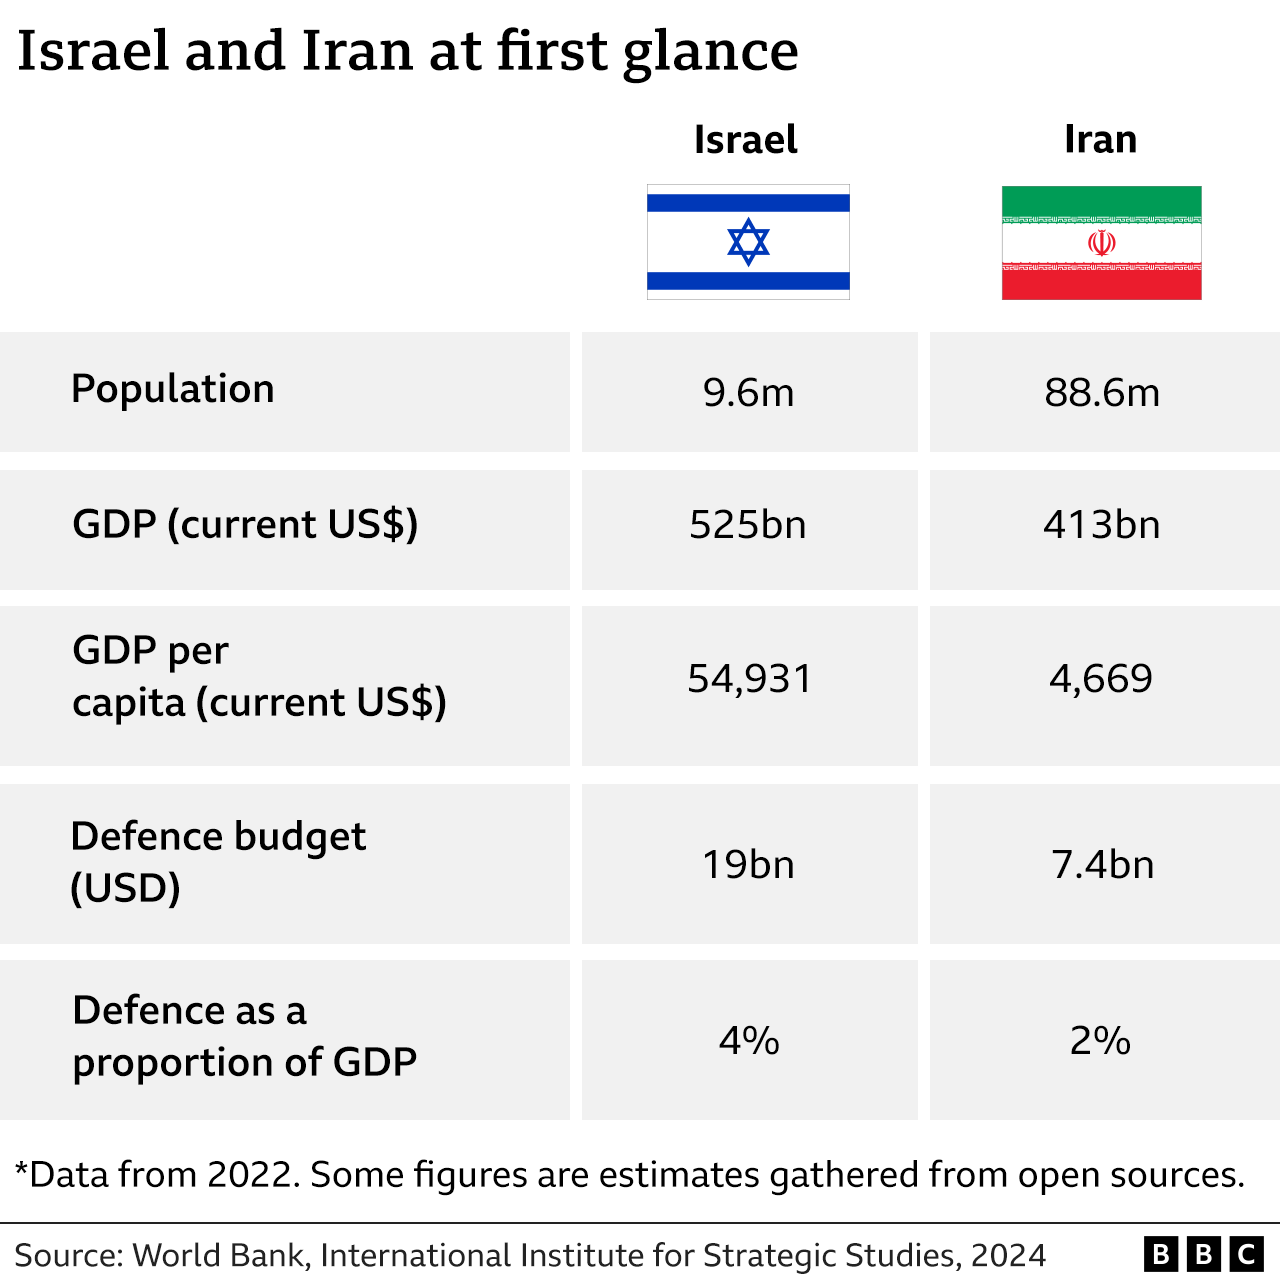 Israel and Iran population, Gross Domestic Product (GDP), defence budget and defence as a proportion of GDP (4% for israel and 2% for Iran) graph